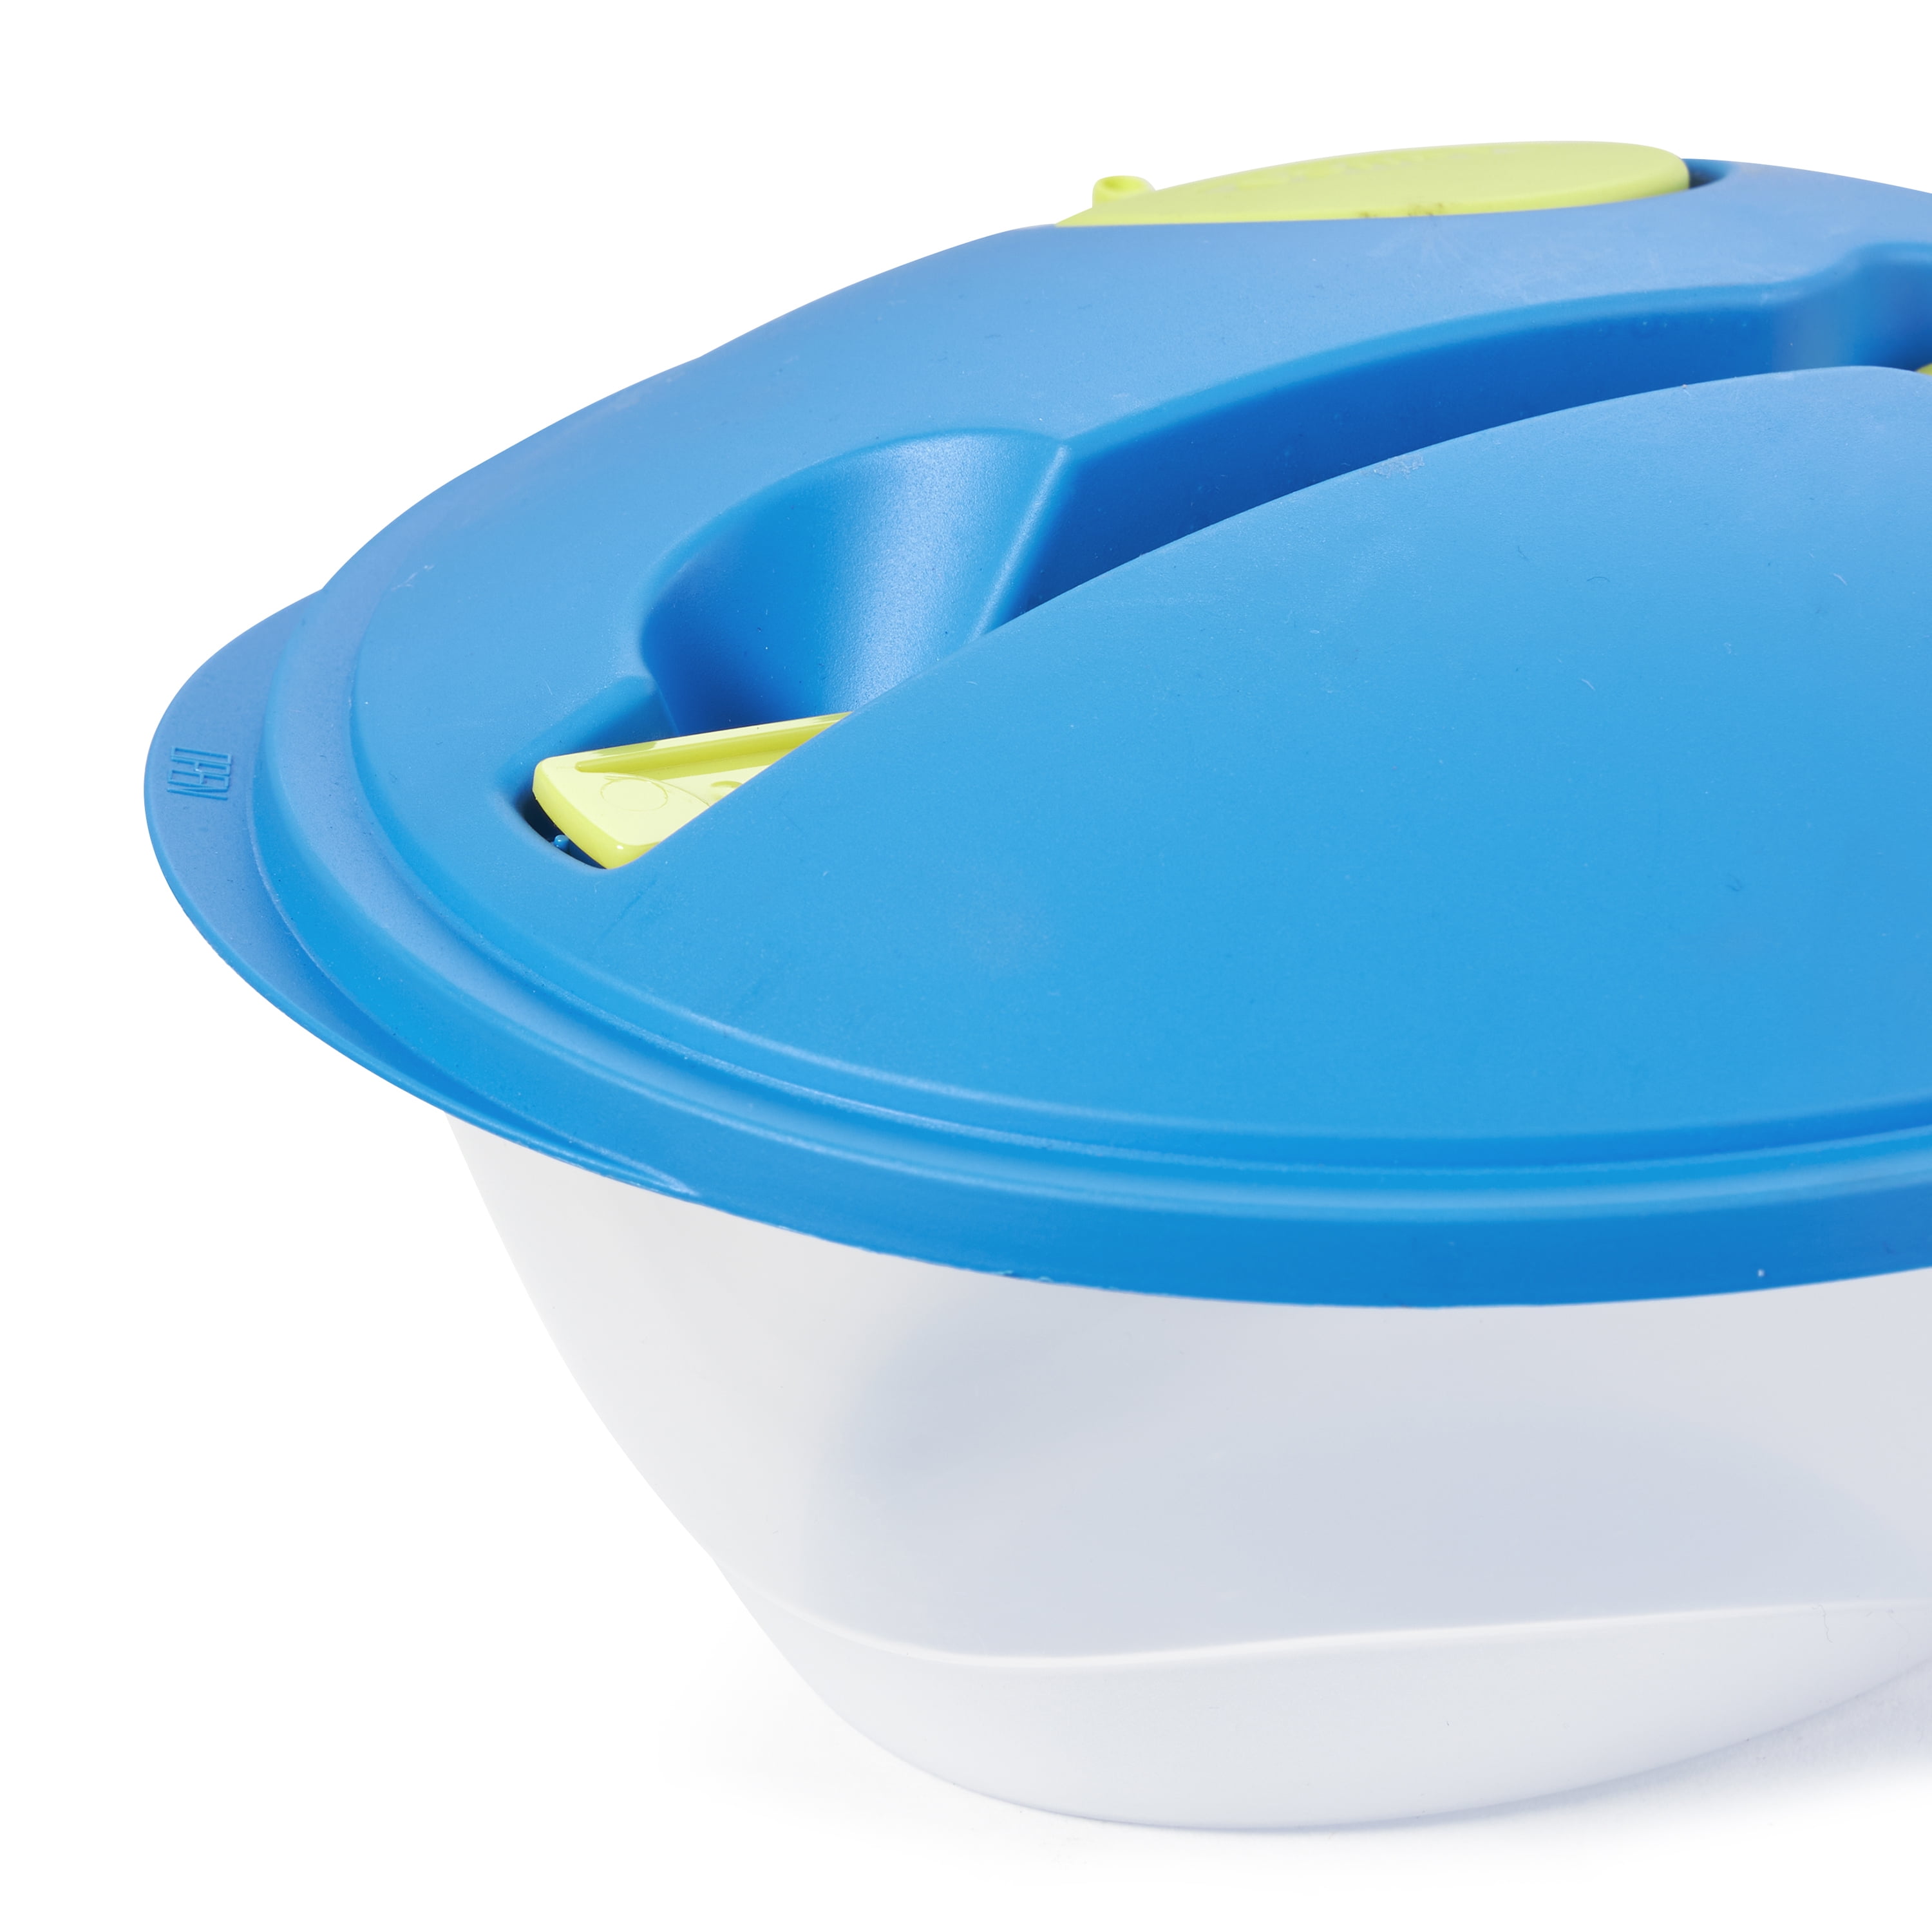 Salad Saver Container Bowl - Inspire Uplift